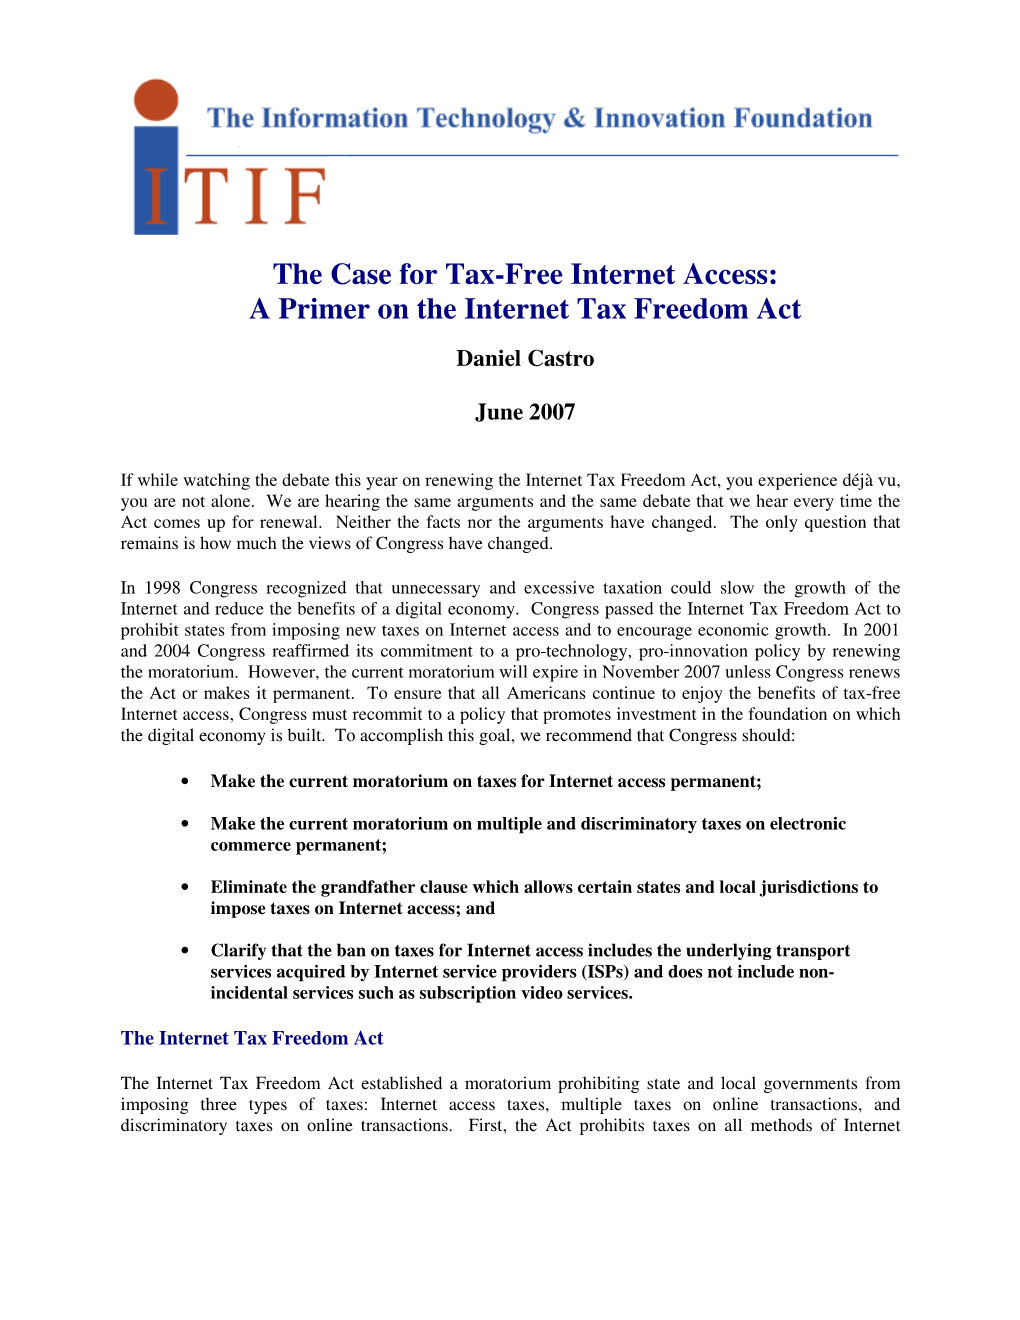 A Primer on the Internet Tax Freedom Act